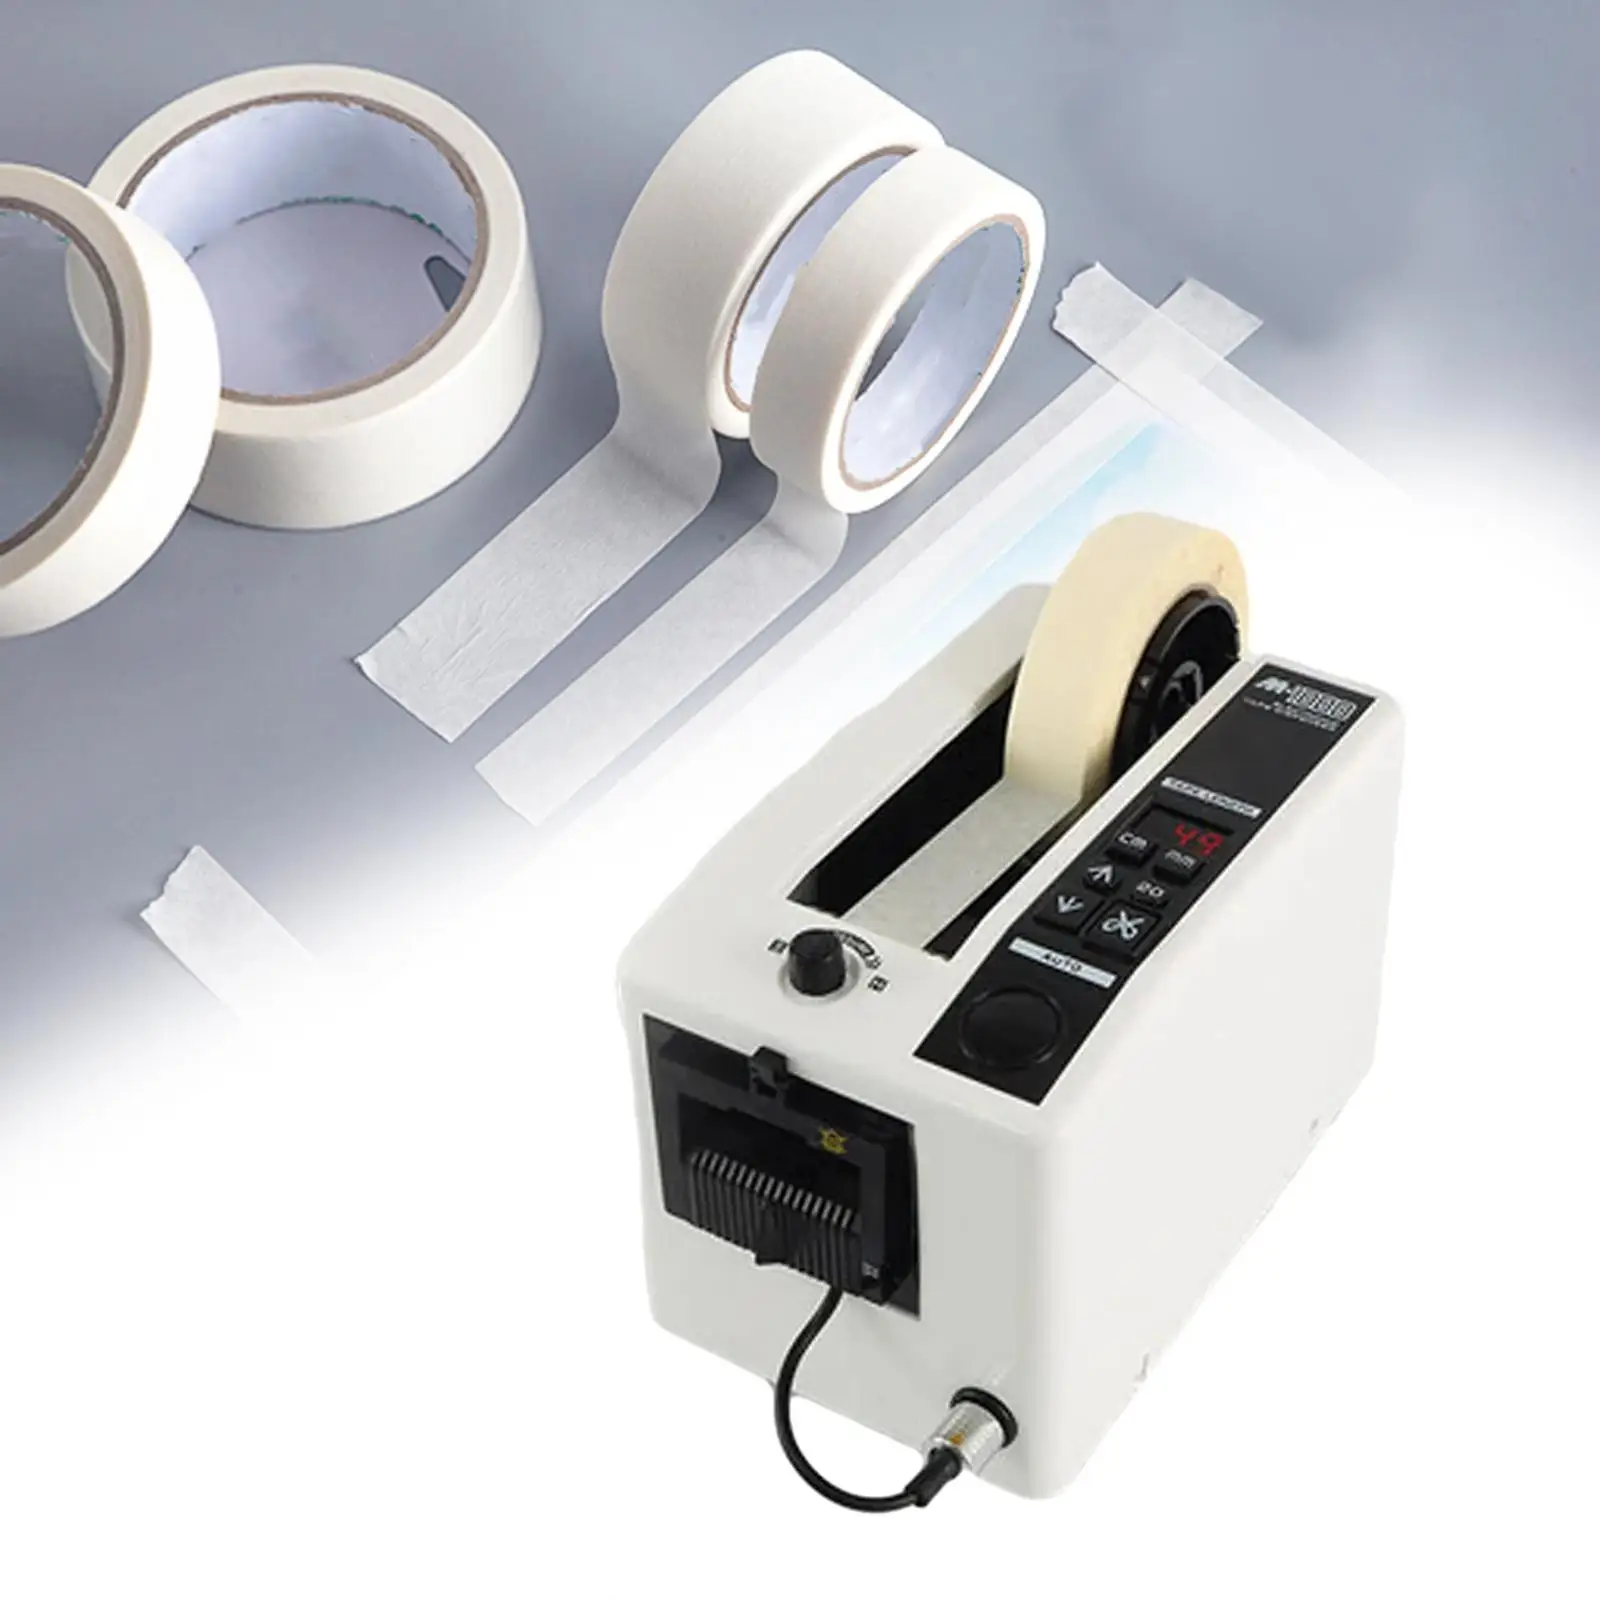 Automatic Tape Dispenser Adhesive Tape Cutter for 6-50mm Width Tapes Scotch Tape Double Sided Tape Packaging Tape Gift Wrapping